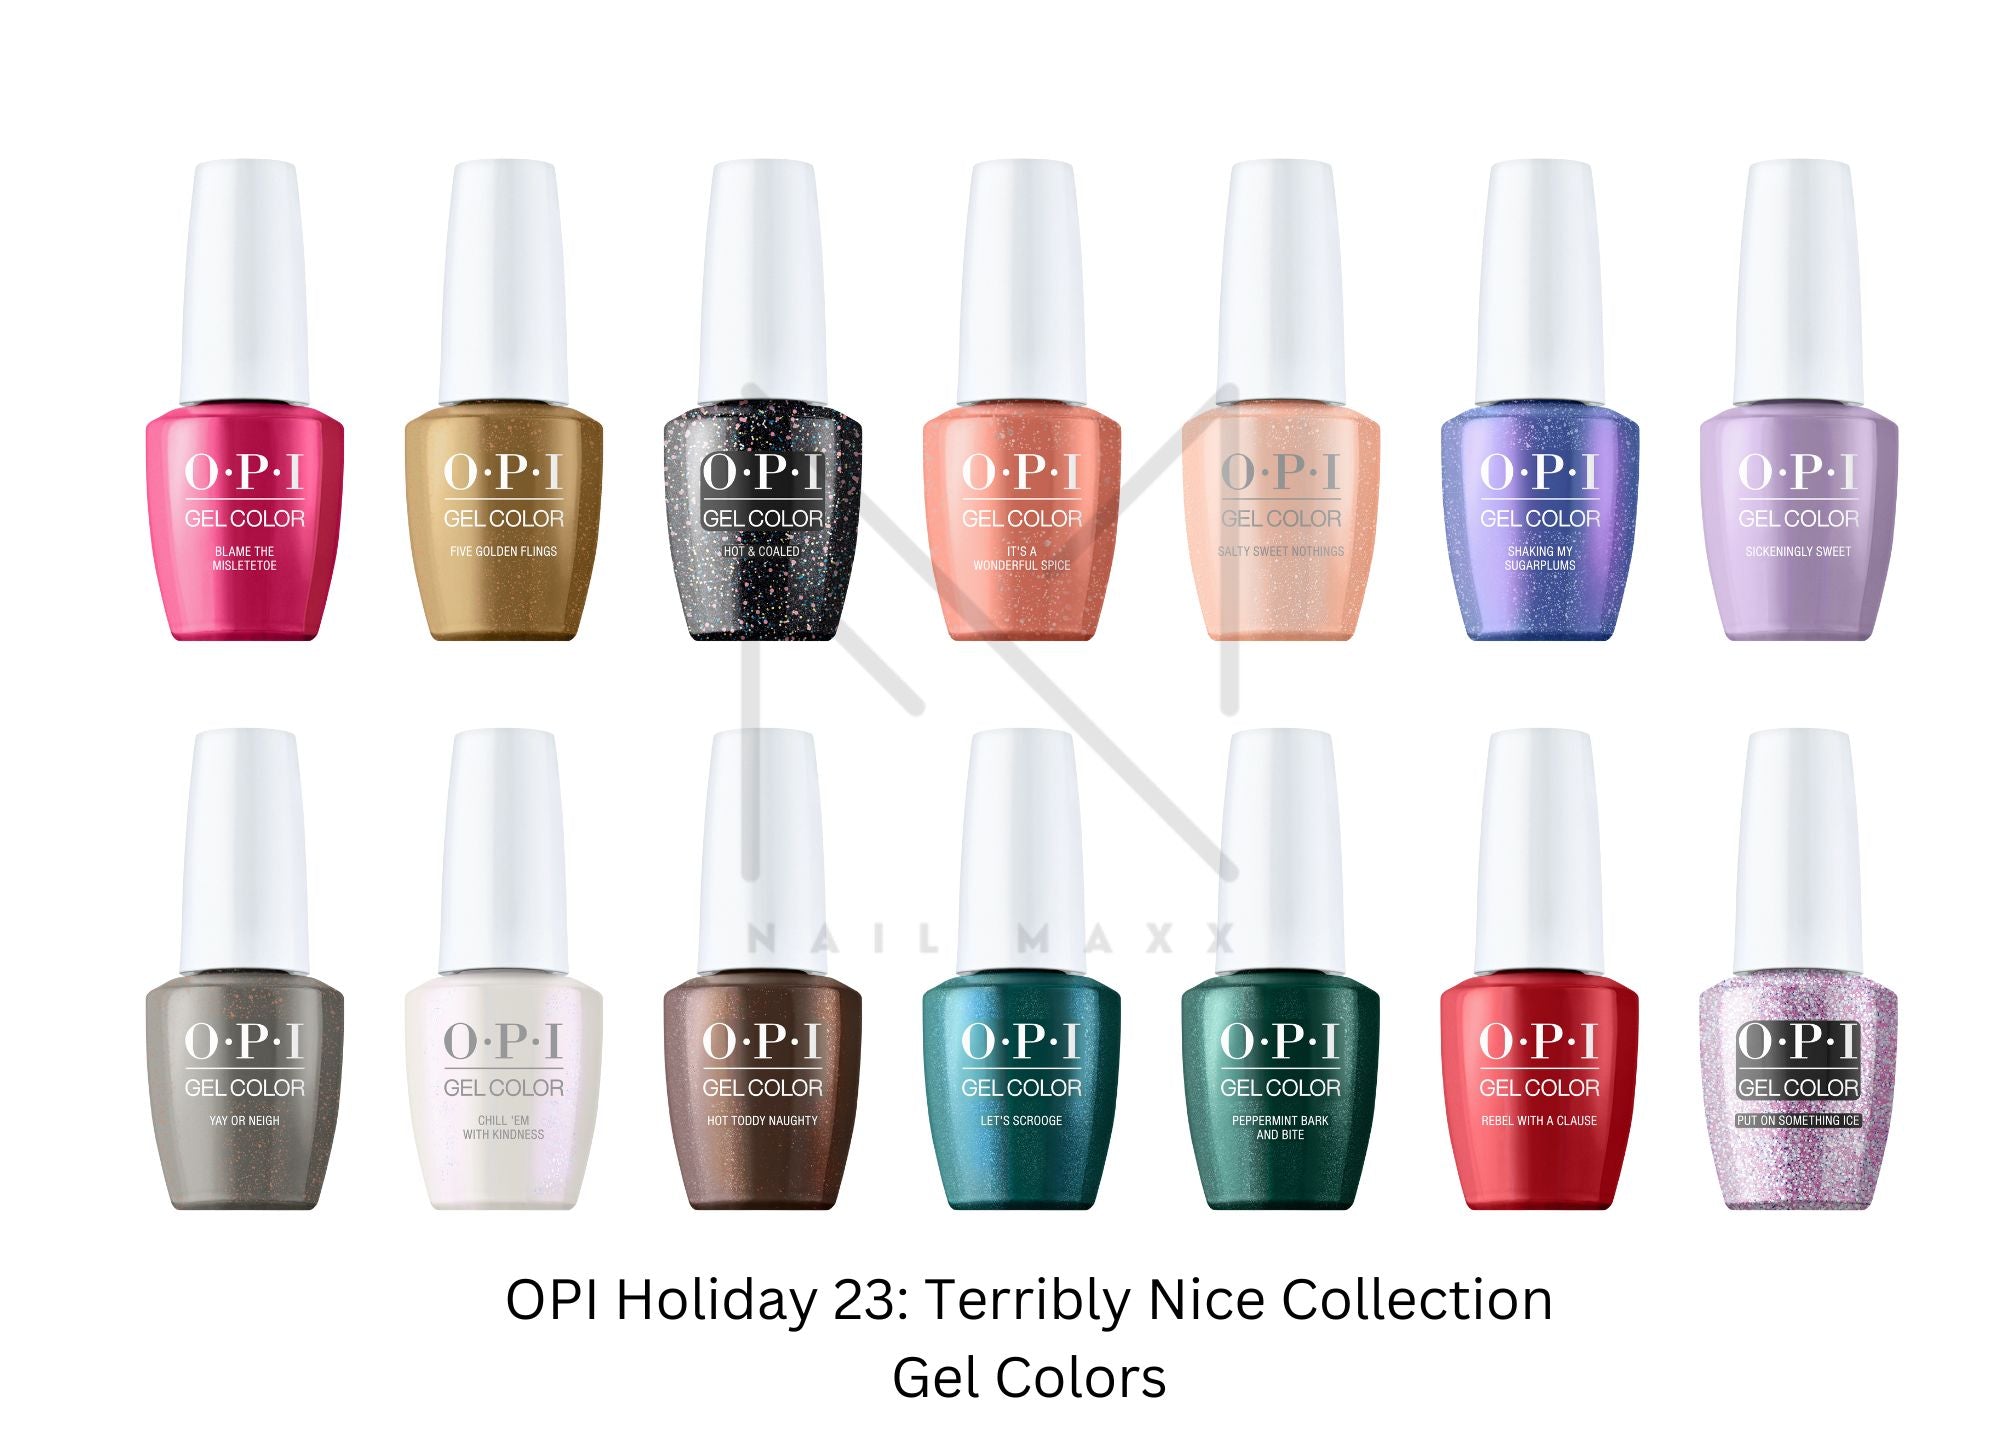 OPI GELCOLOR HOLIDAY 23 TERRIBLY NICE COLLECTION